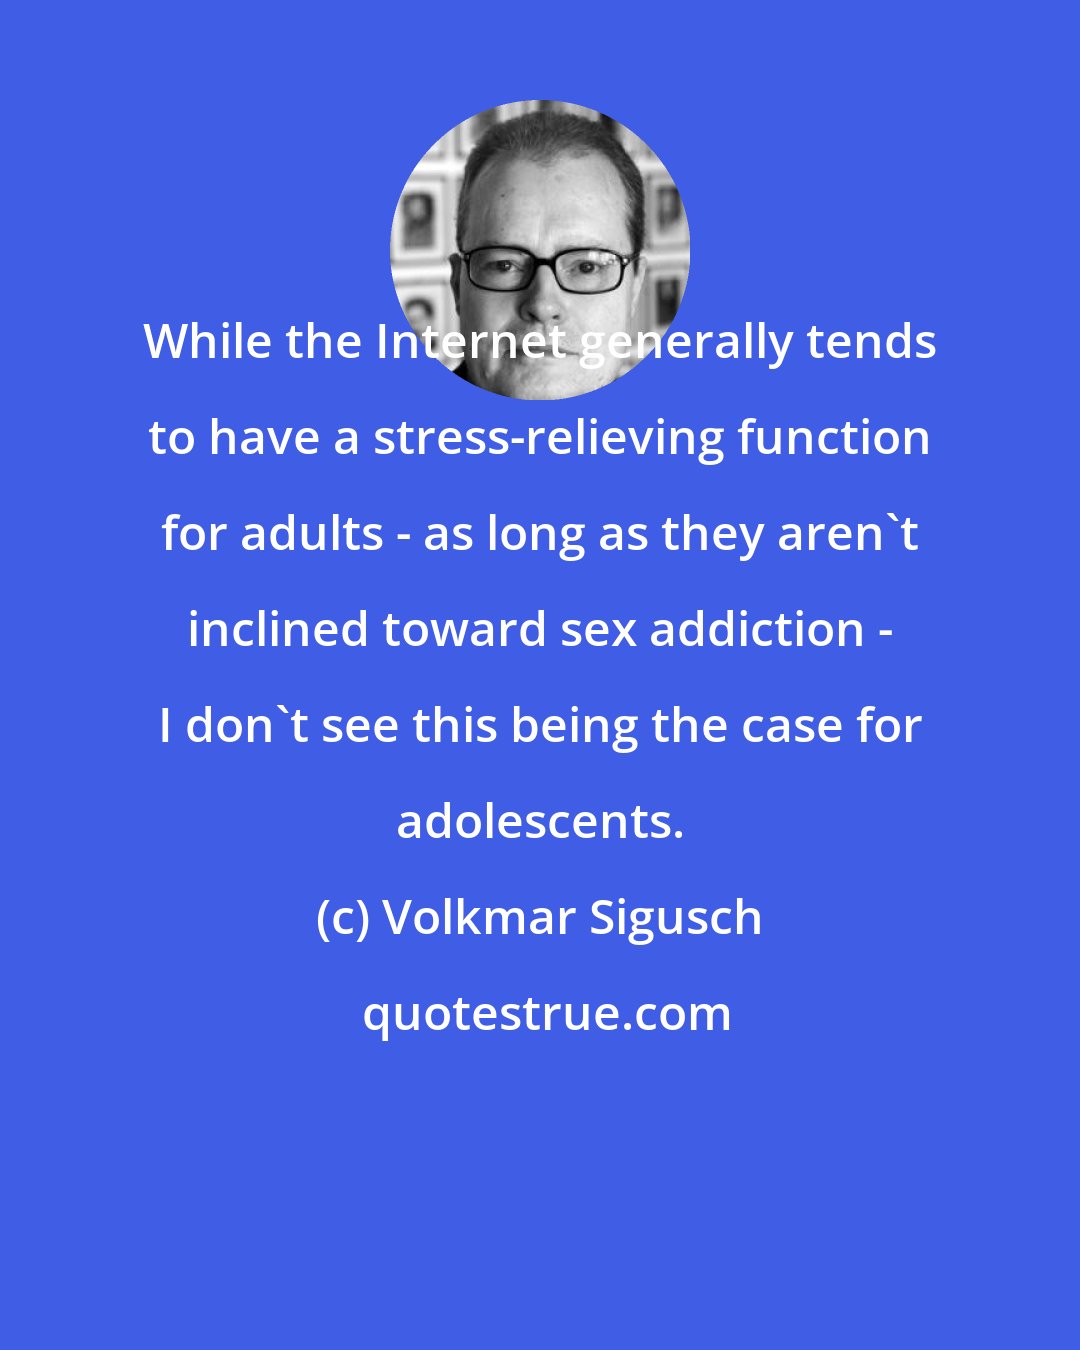 Volkmar Sigusch: While the Internet generally tends to have a stress-relieving function for adults - as long as they aren't inclined toward sex addiction - I don't see this being the case for adolescents.